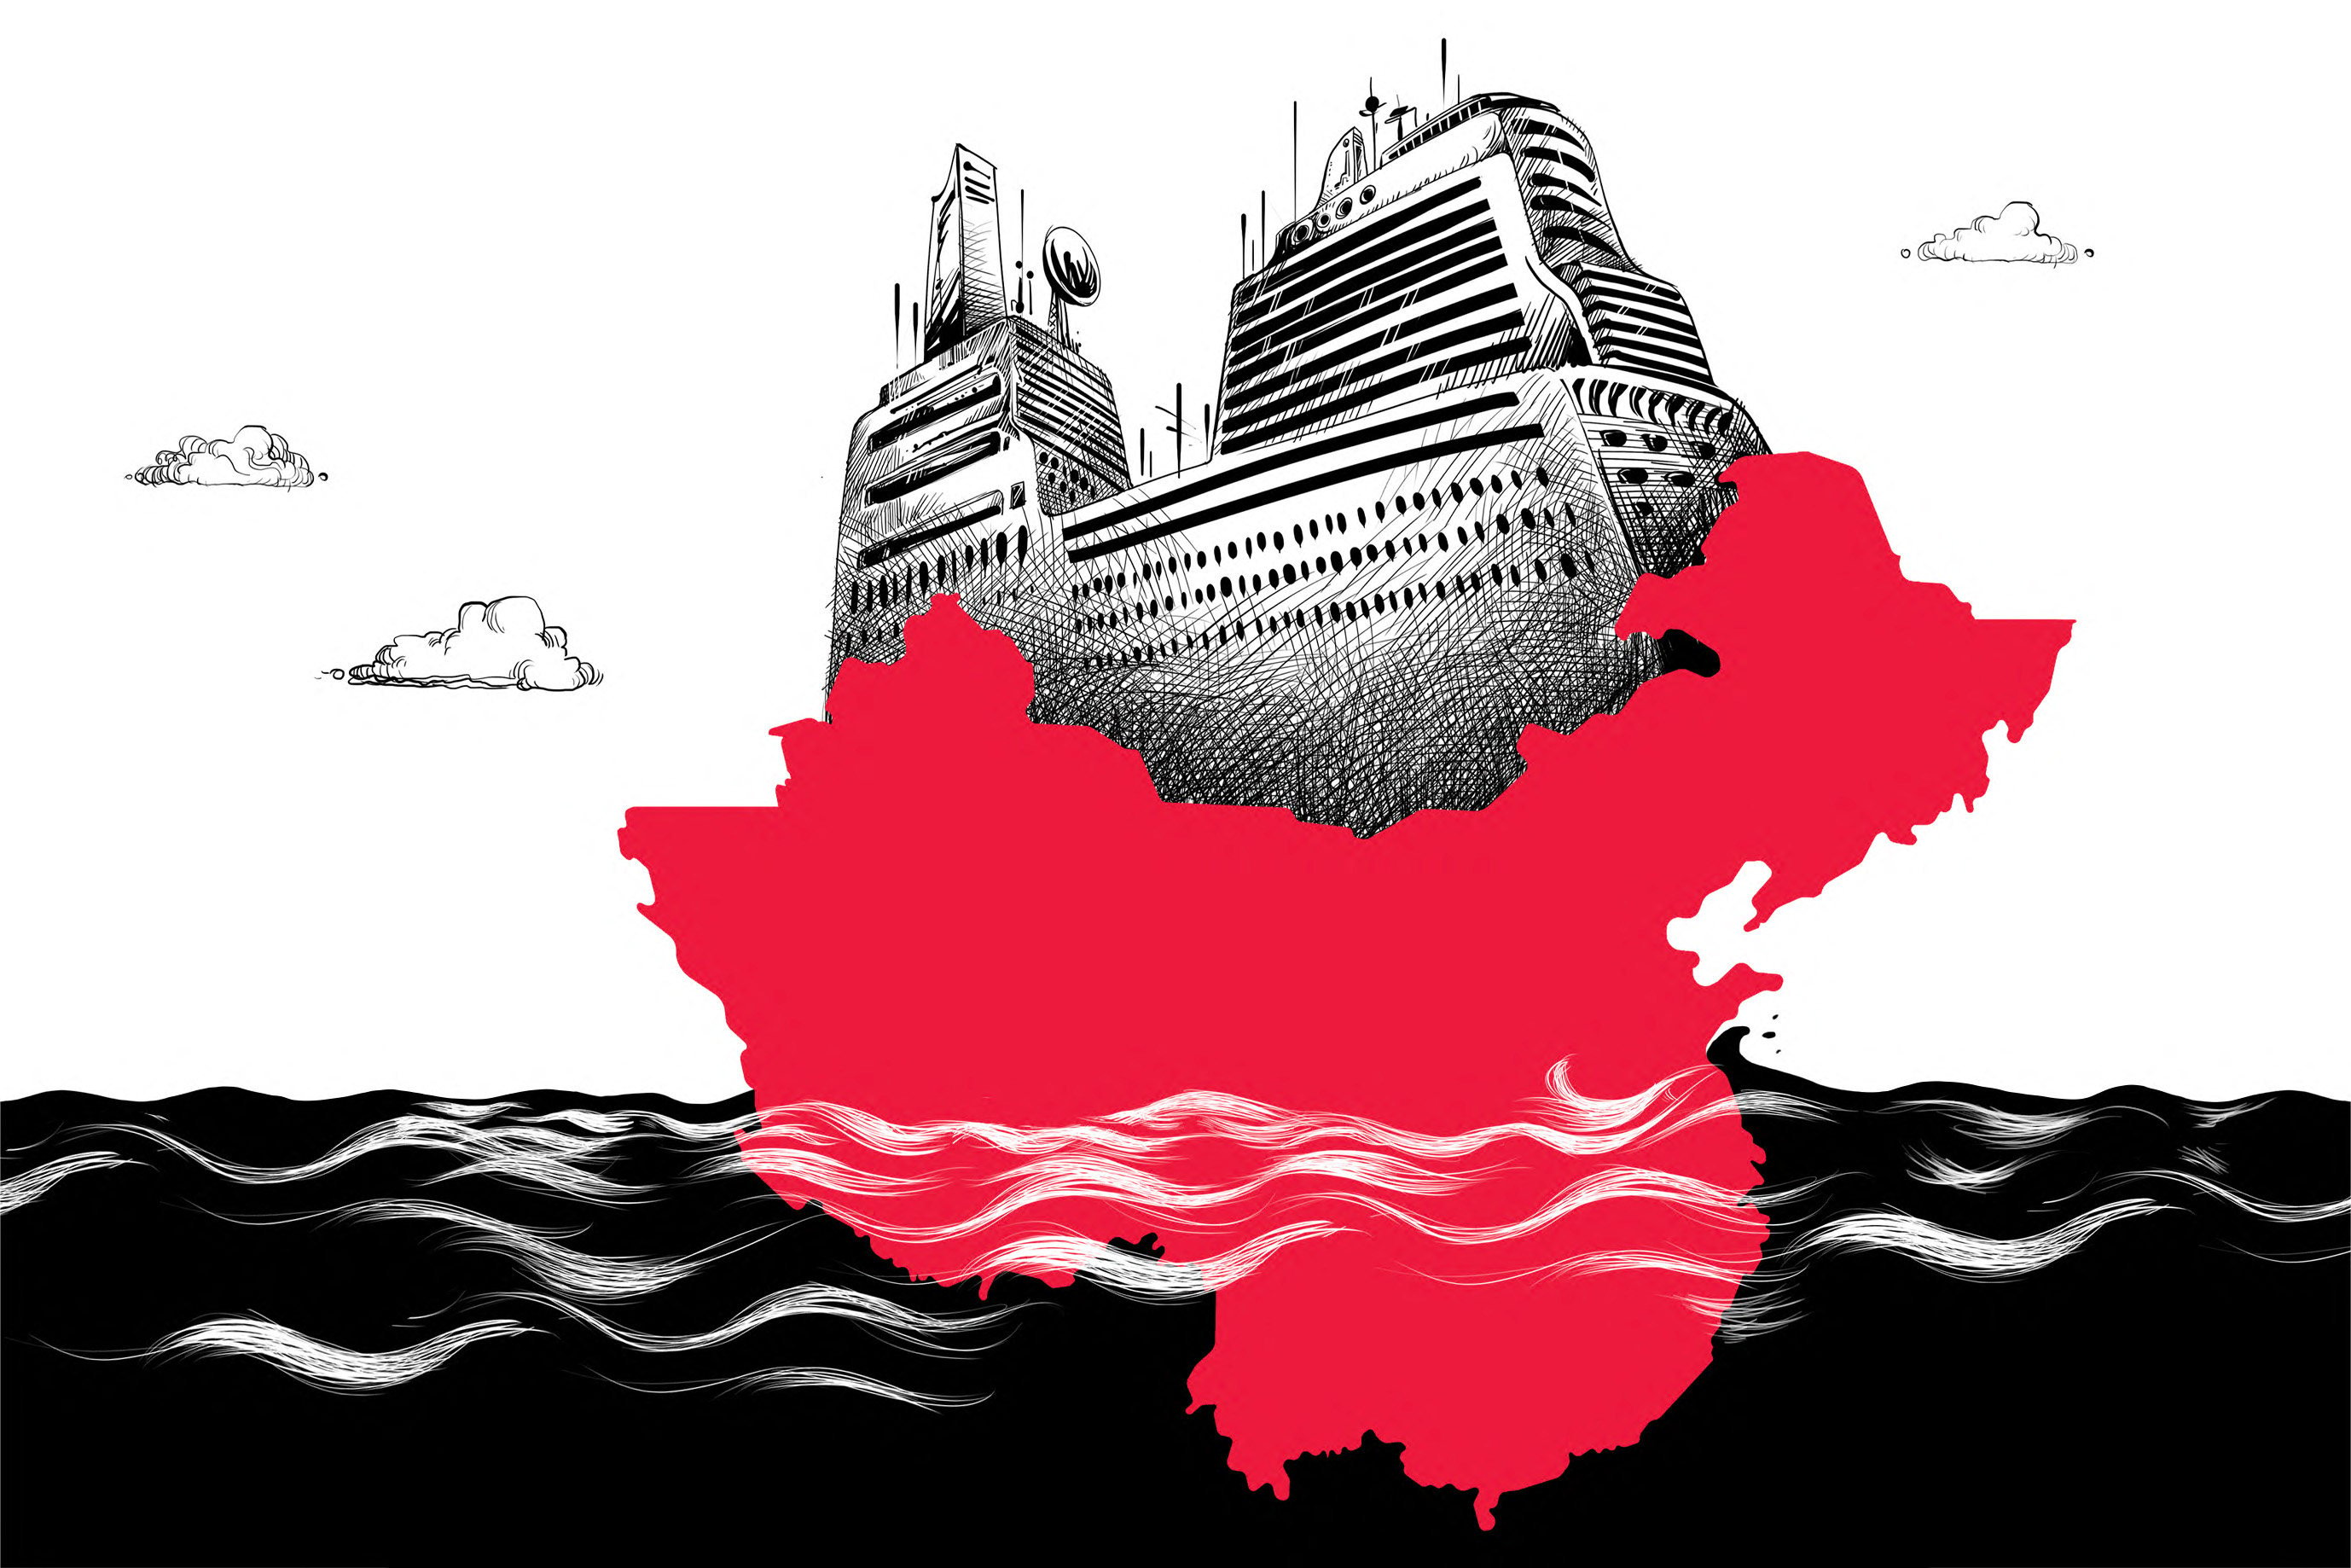  China’s first home-grown large cruise liner undocked in Shanghai this week in a breakthrough for the nation’s shipbuilding and high-end manufacturing ambitions. Illustration: Victor Sanjinez